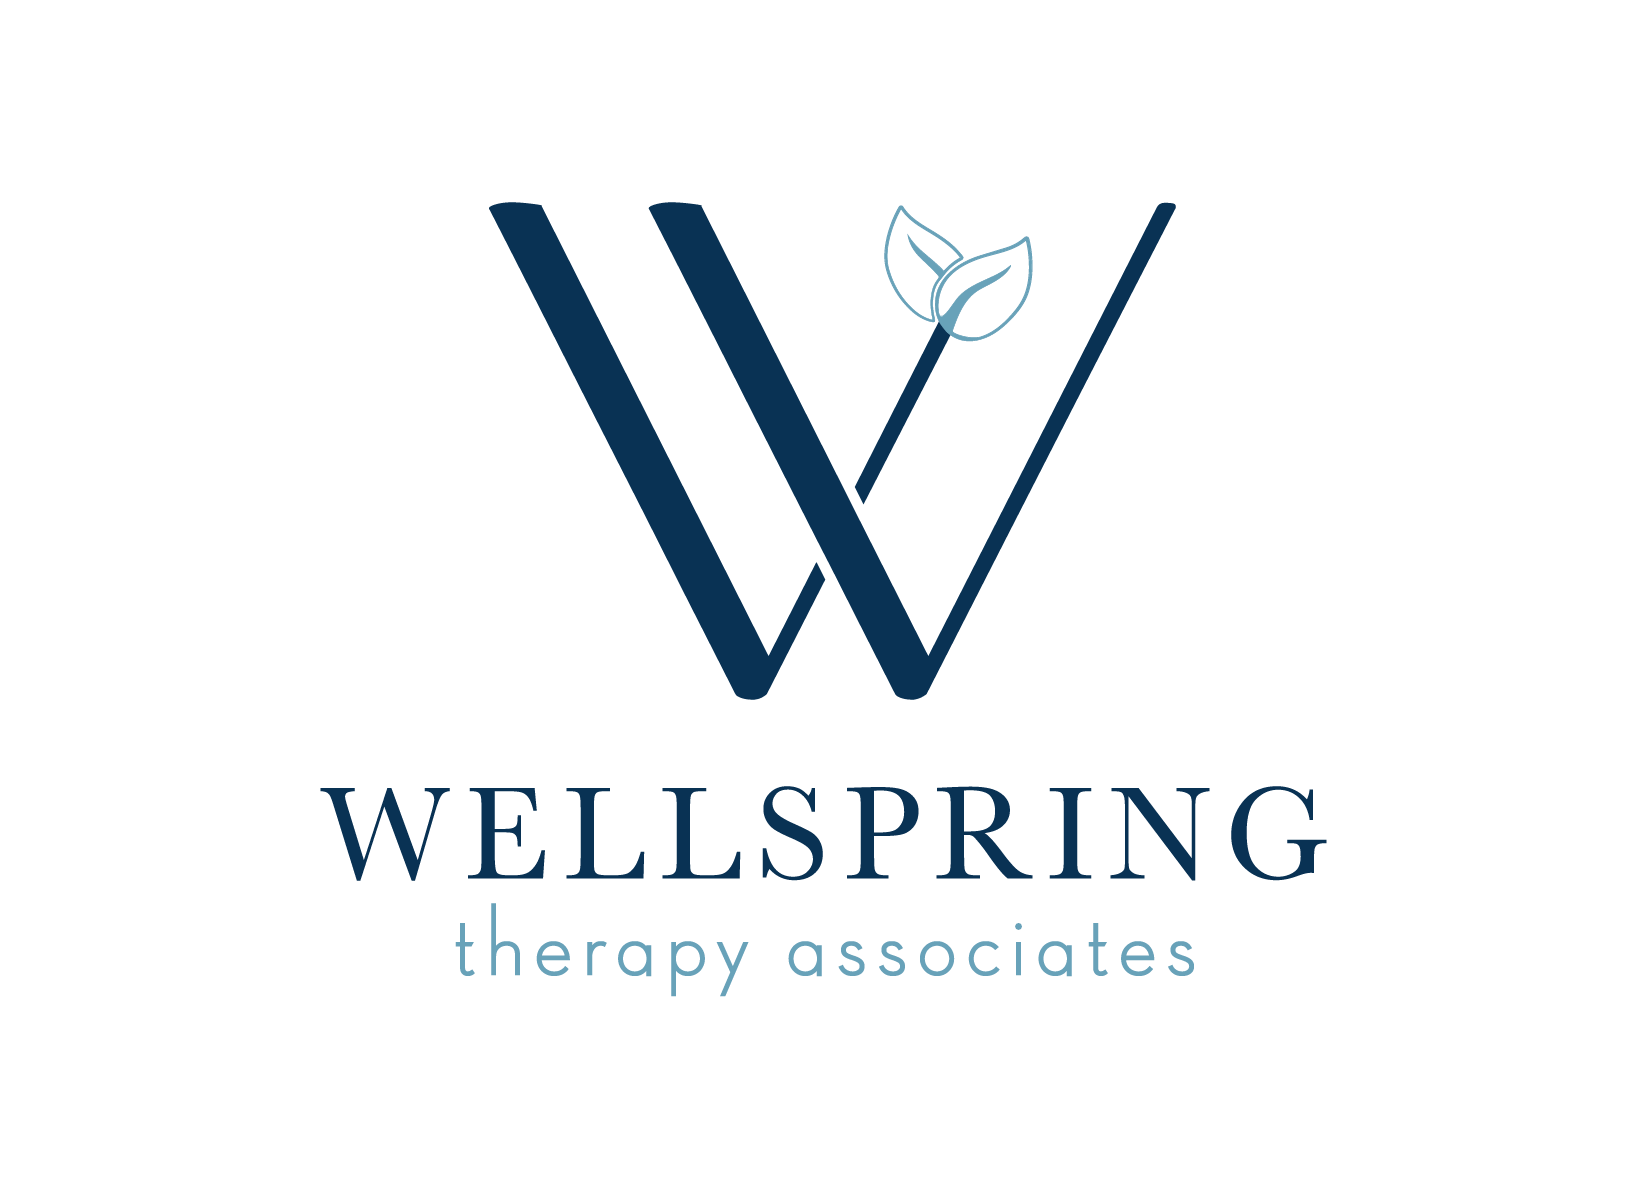 Live in Freedom - Wellspring Therapy Associates